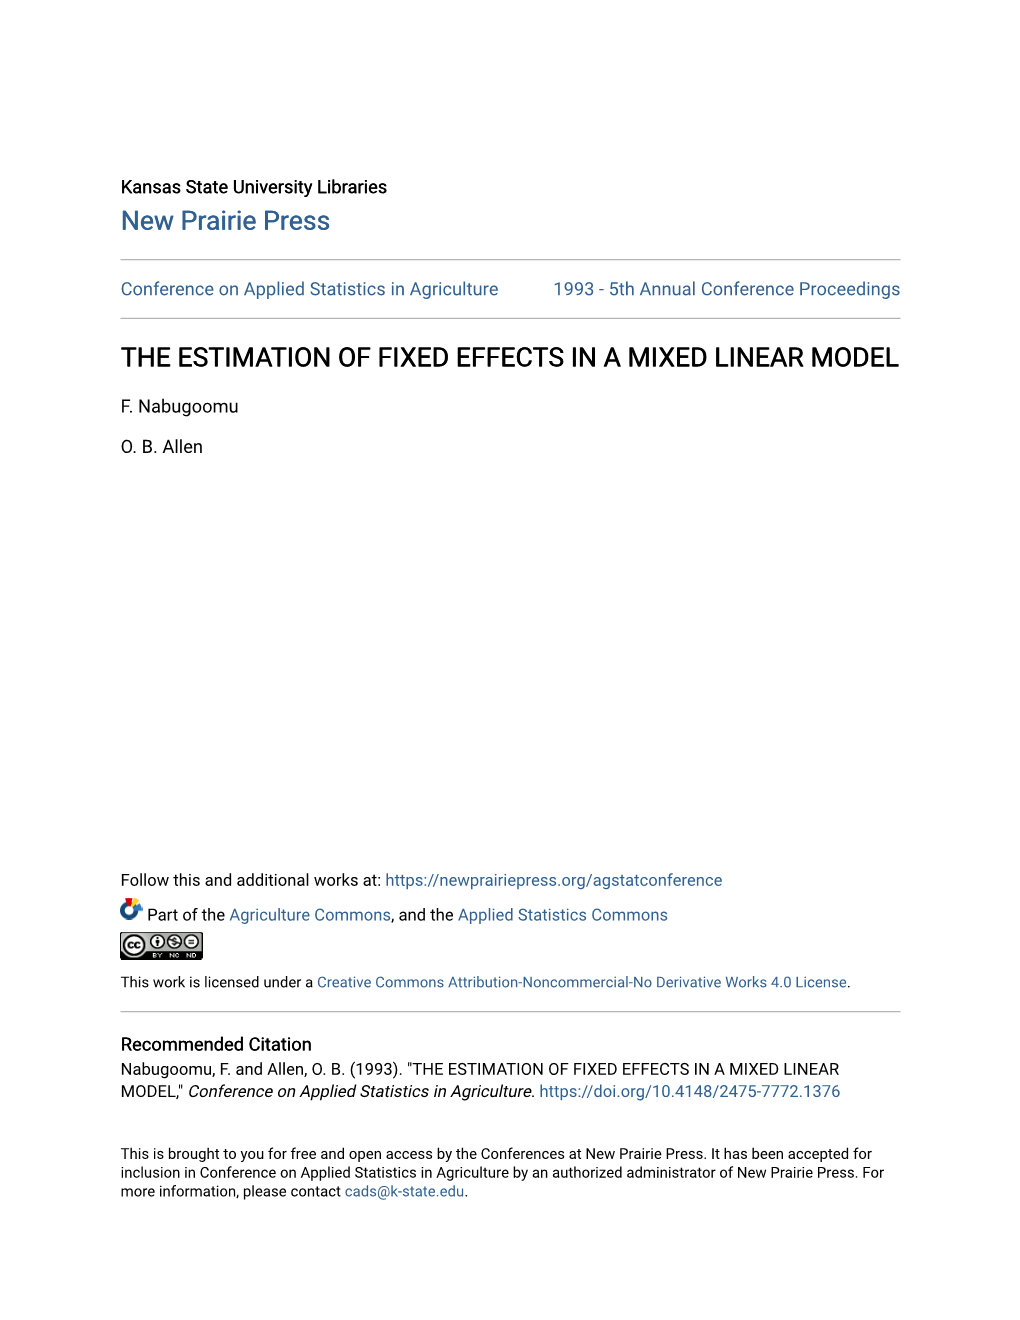 The Estimation of Fixed Effects in a Mixed Linear Model